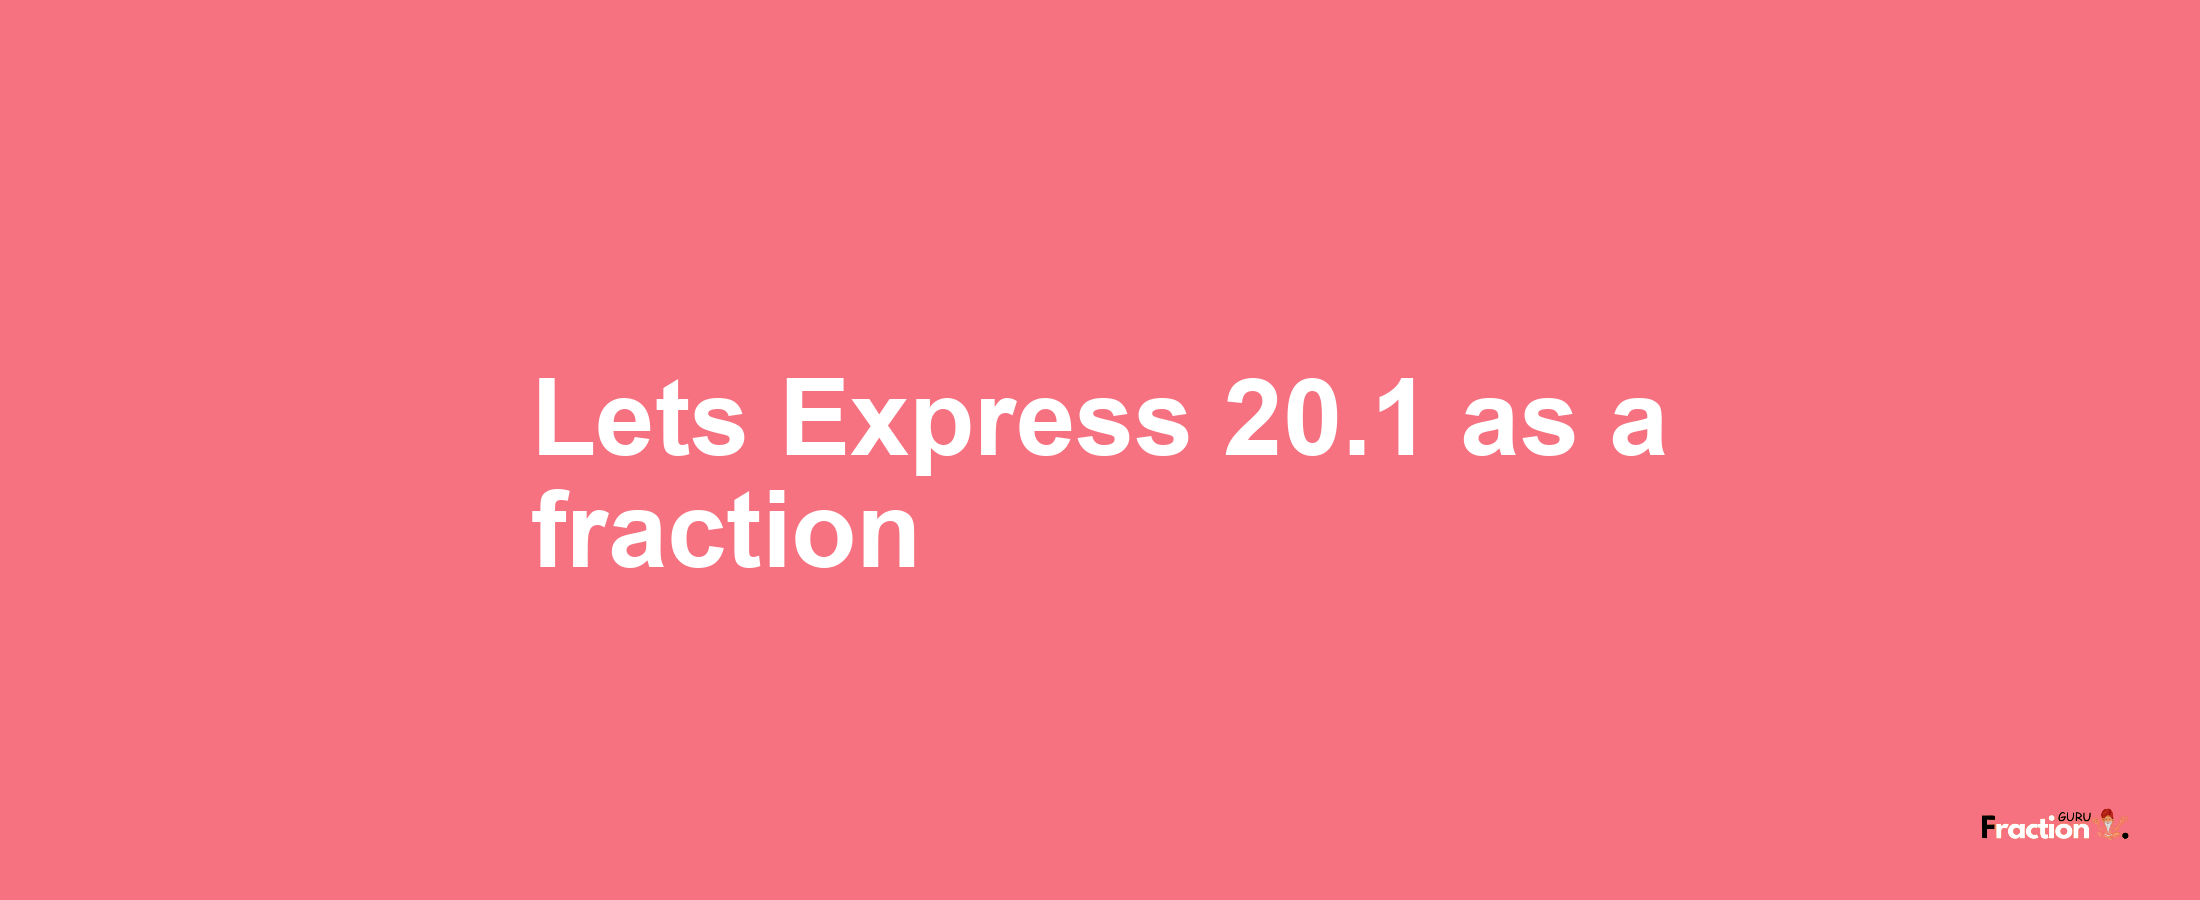 Lets Express 20.1 as afraction